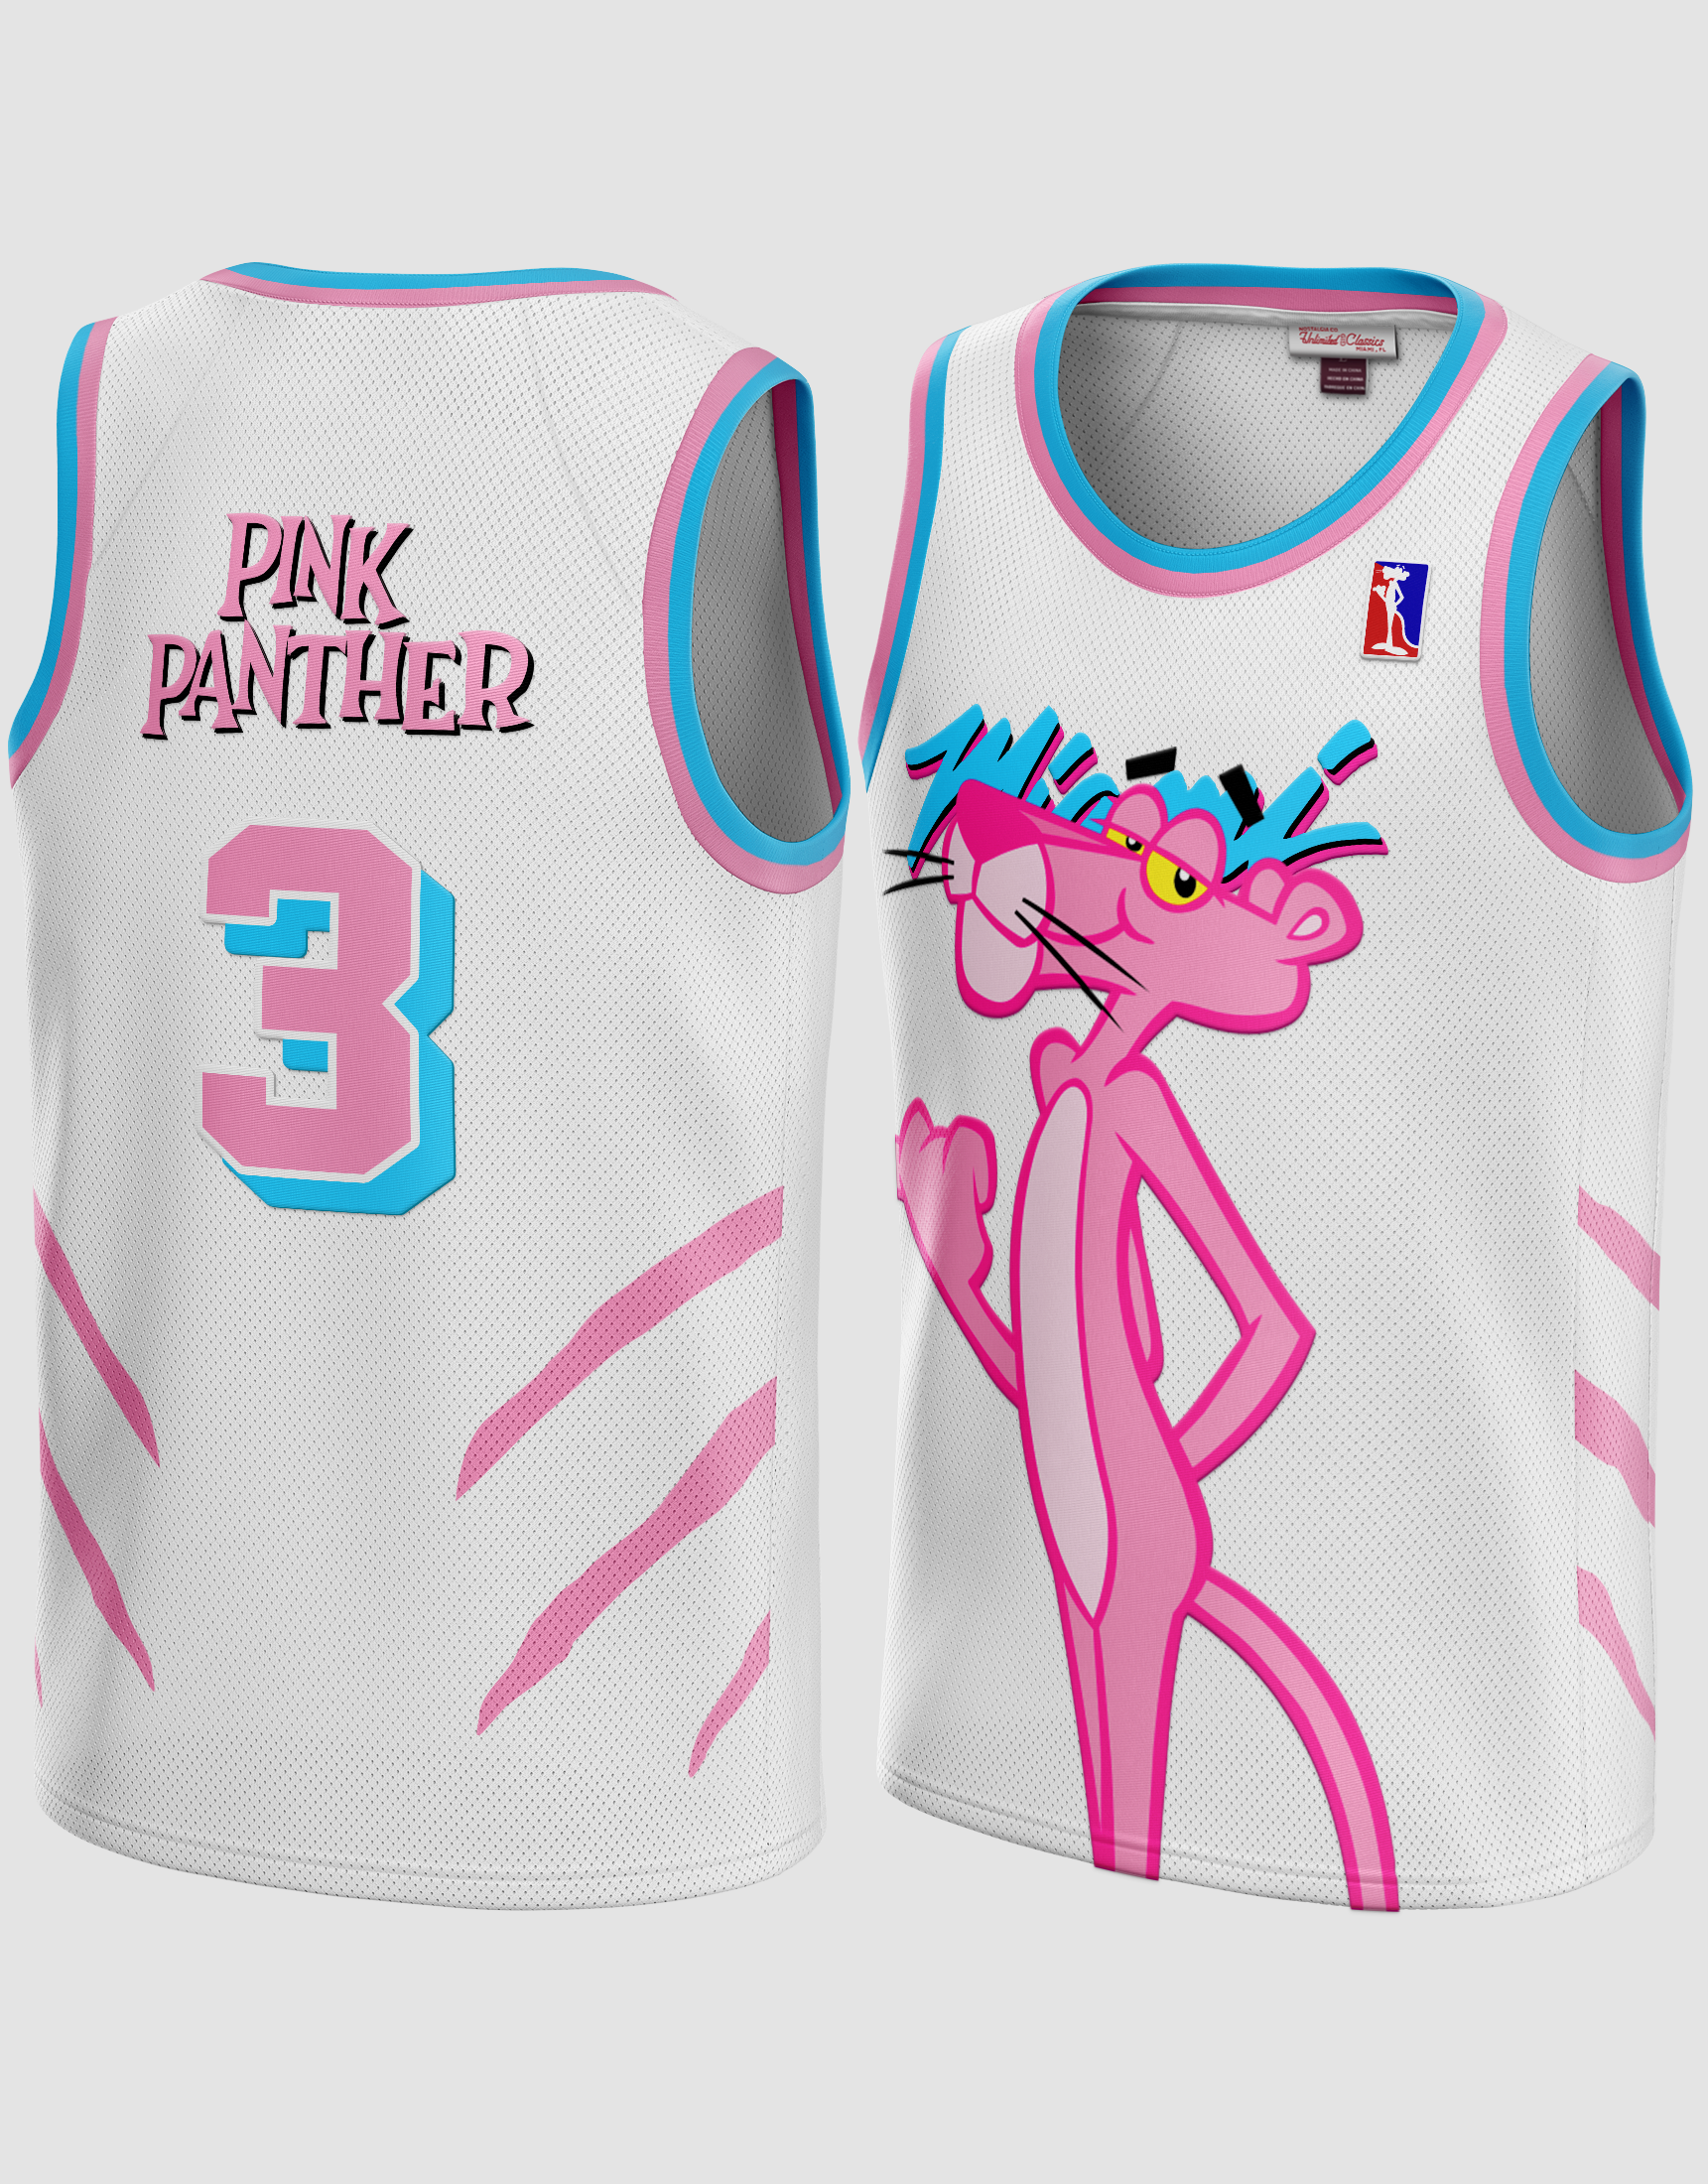 Special Edition Pink Panther Jersey. 